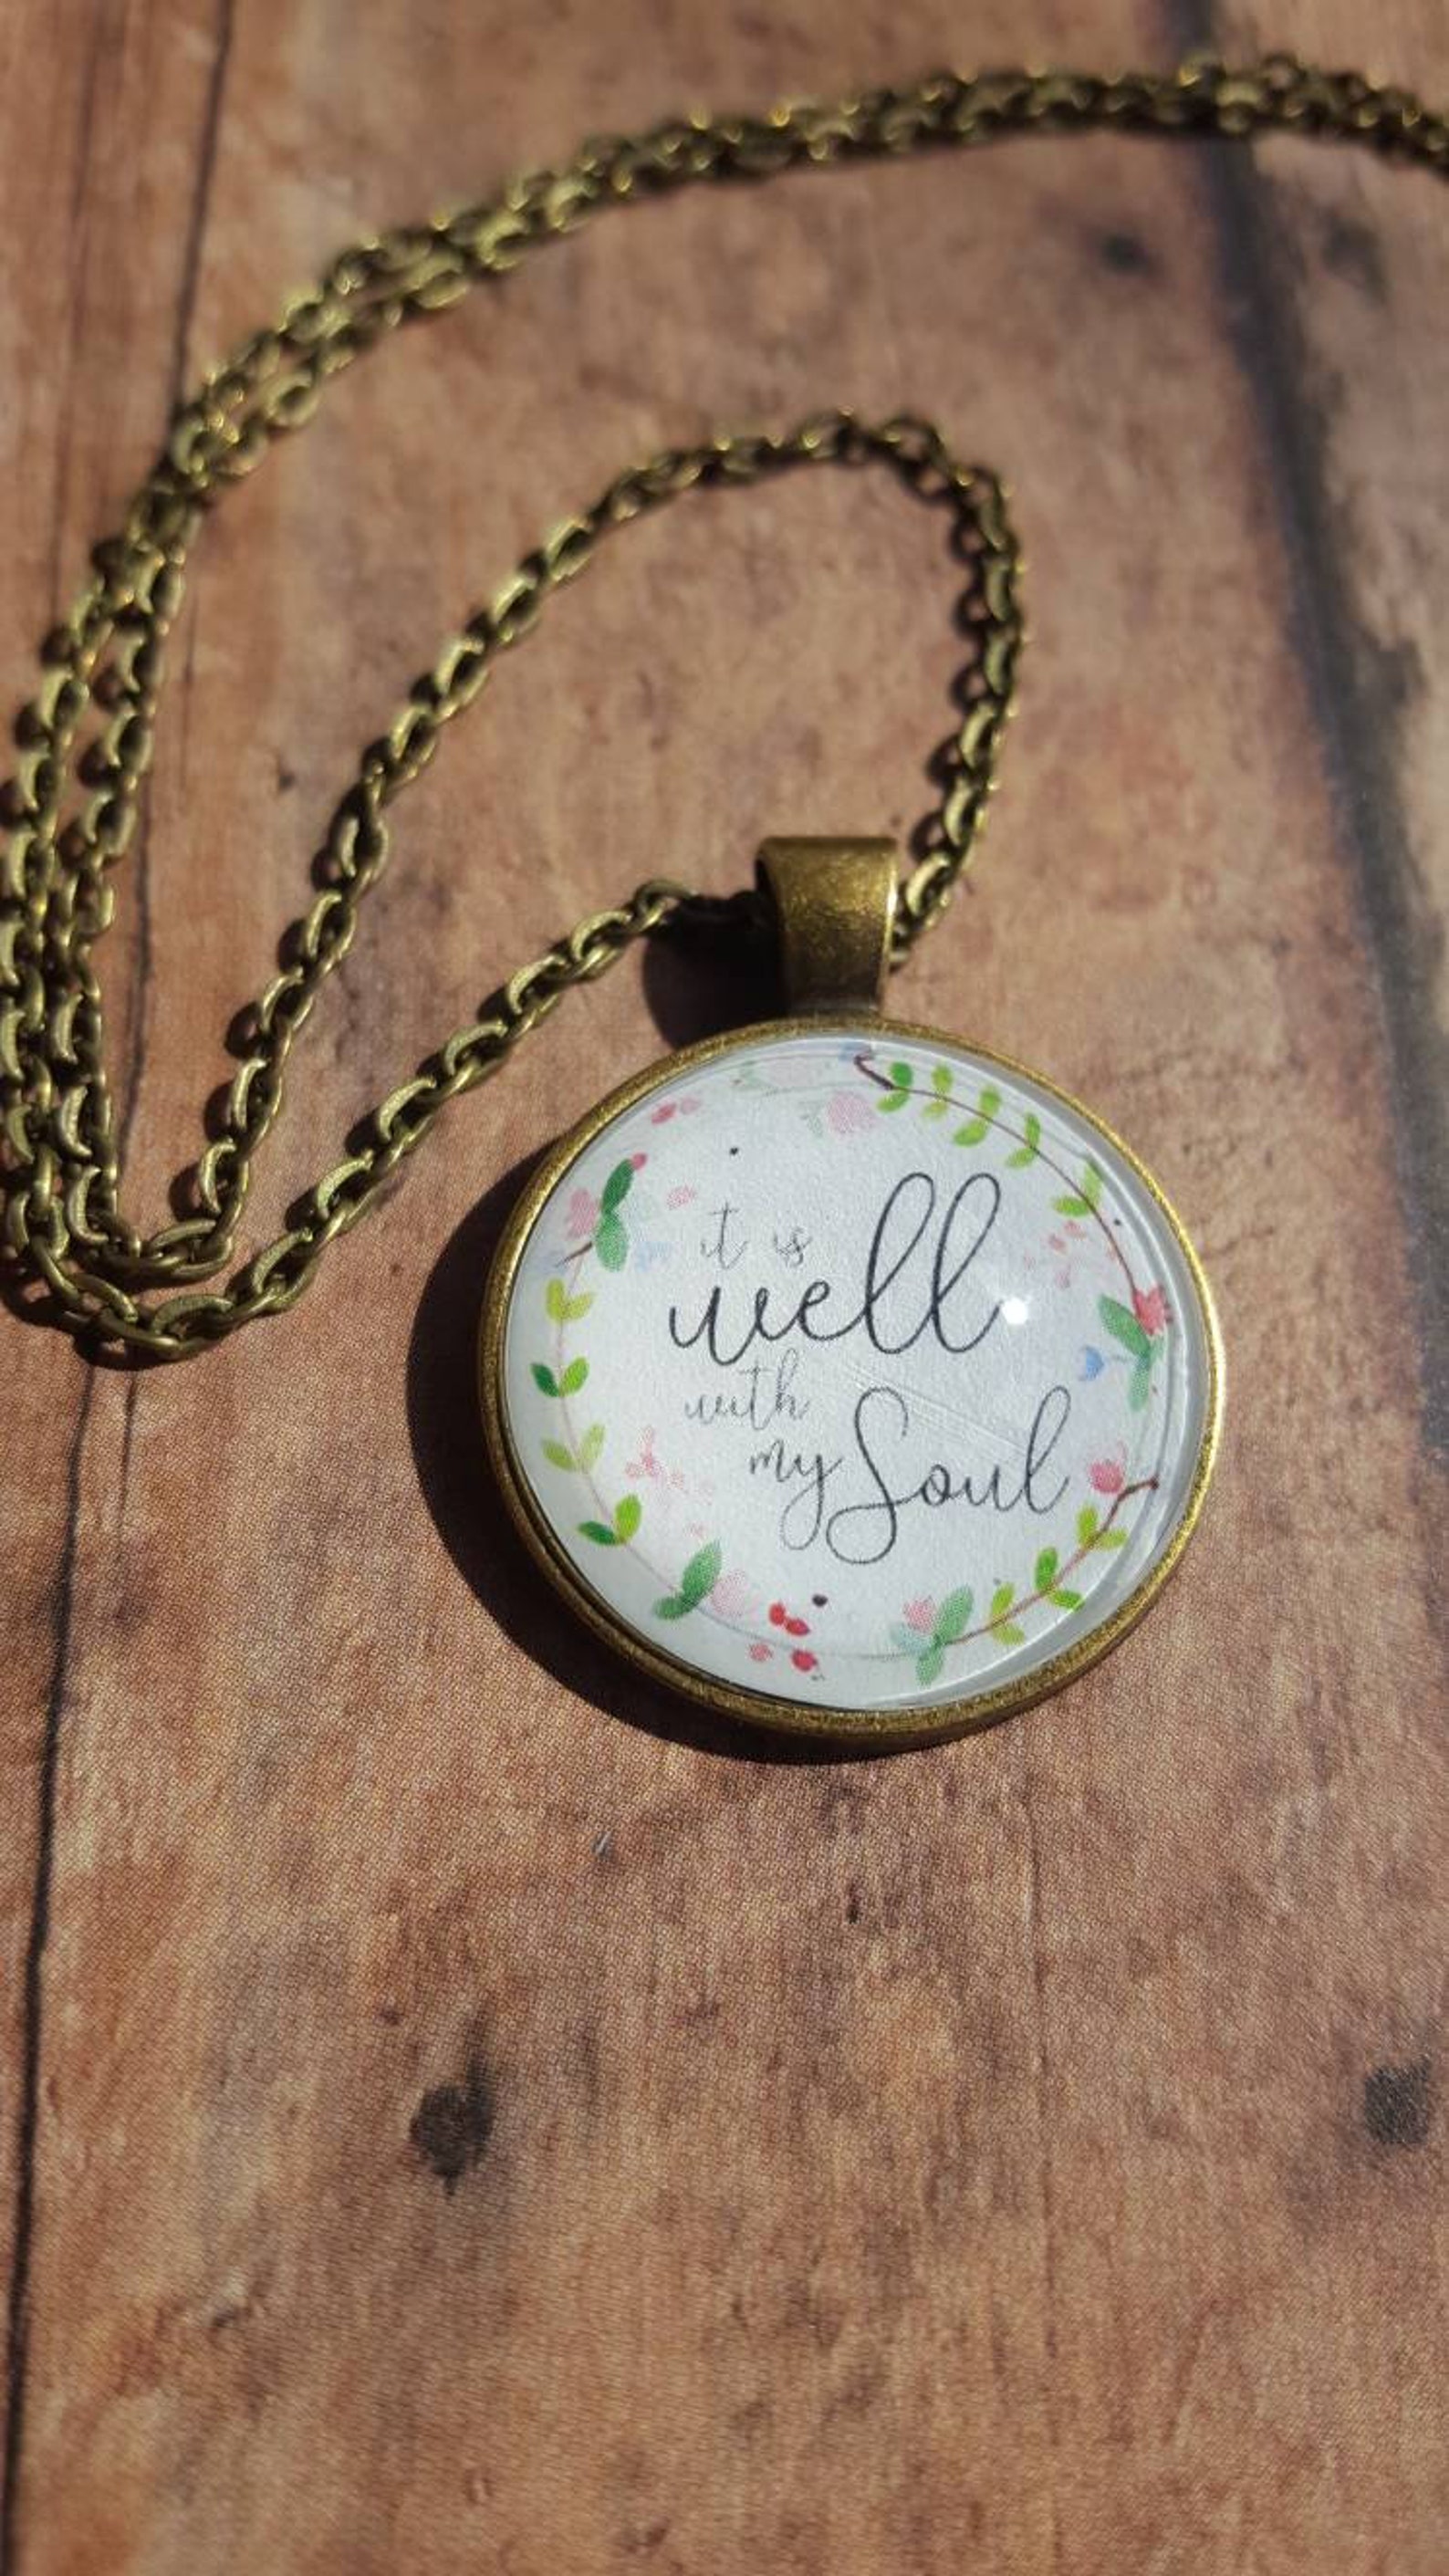 It Is Well Necklace/Christian Jewelry/Hymn Necklace/Pendant | Etsy